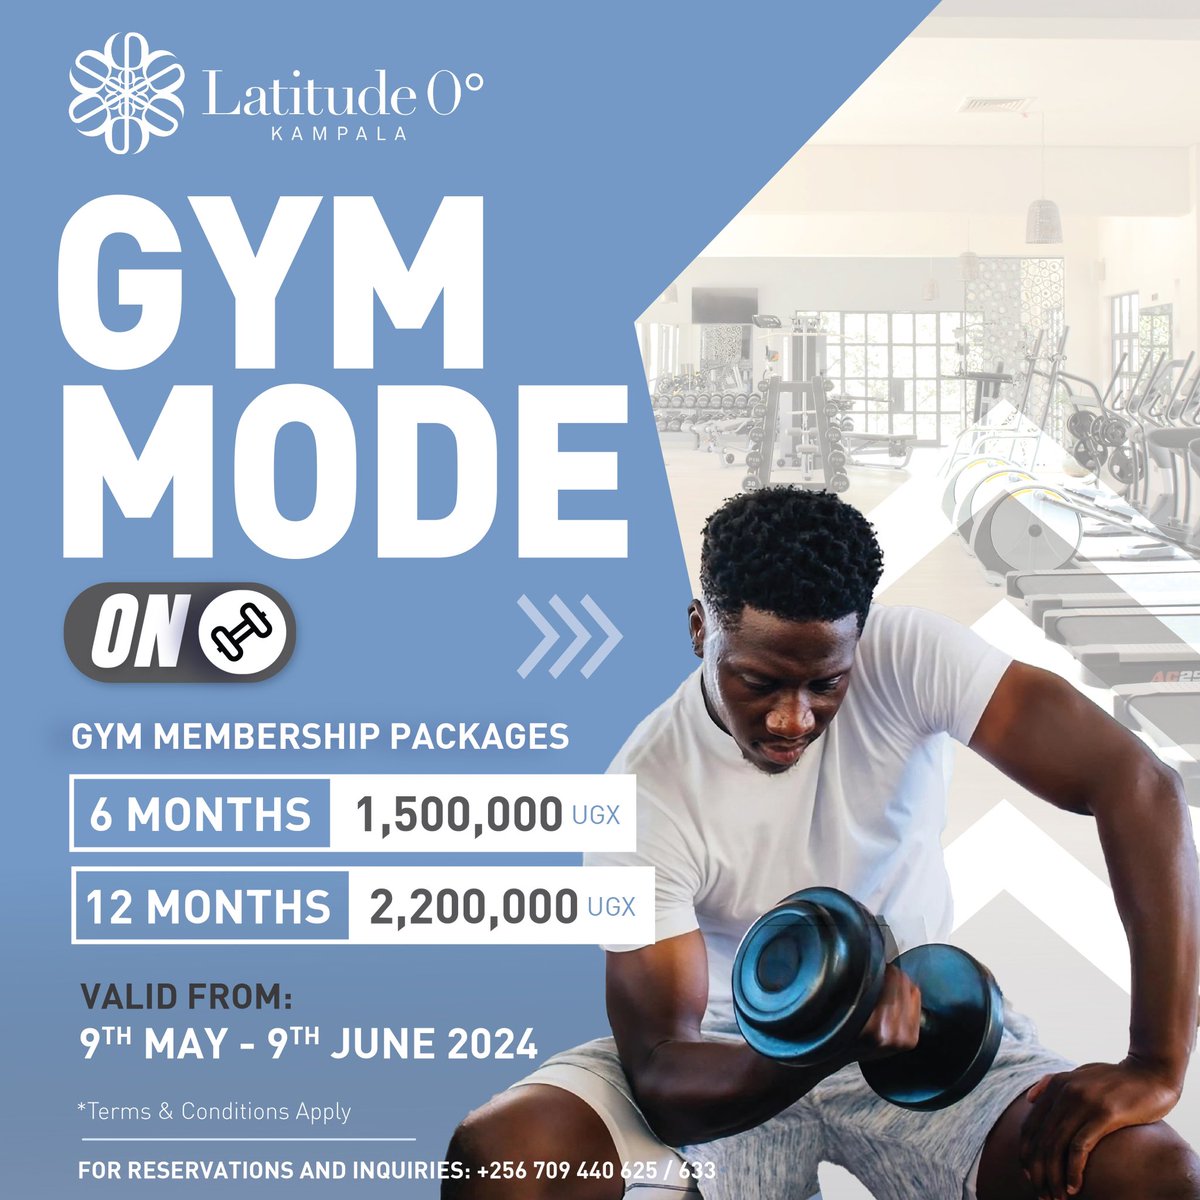 This is your sign to stay on top of your fitness routine during your stay at The Gym. 💪🏽 

Take advantage of our extended Gym Membership Packages. 

For more information kindly contact us on:
📧 0spa@thelatitudehotels.com
☎️ +256 (0) 709 440 625 / 603

#GymMembership